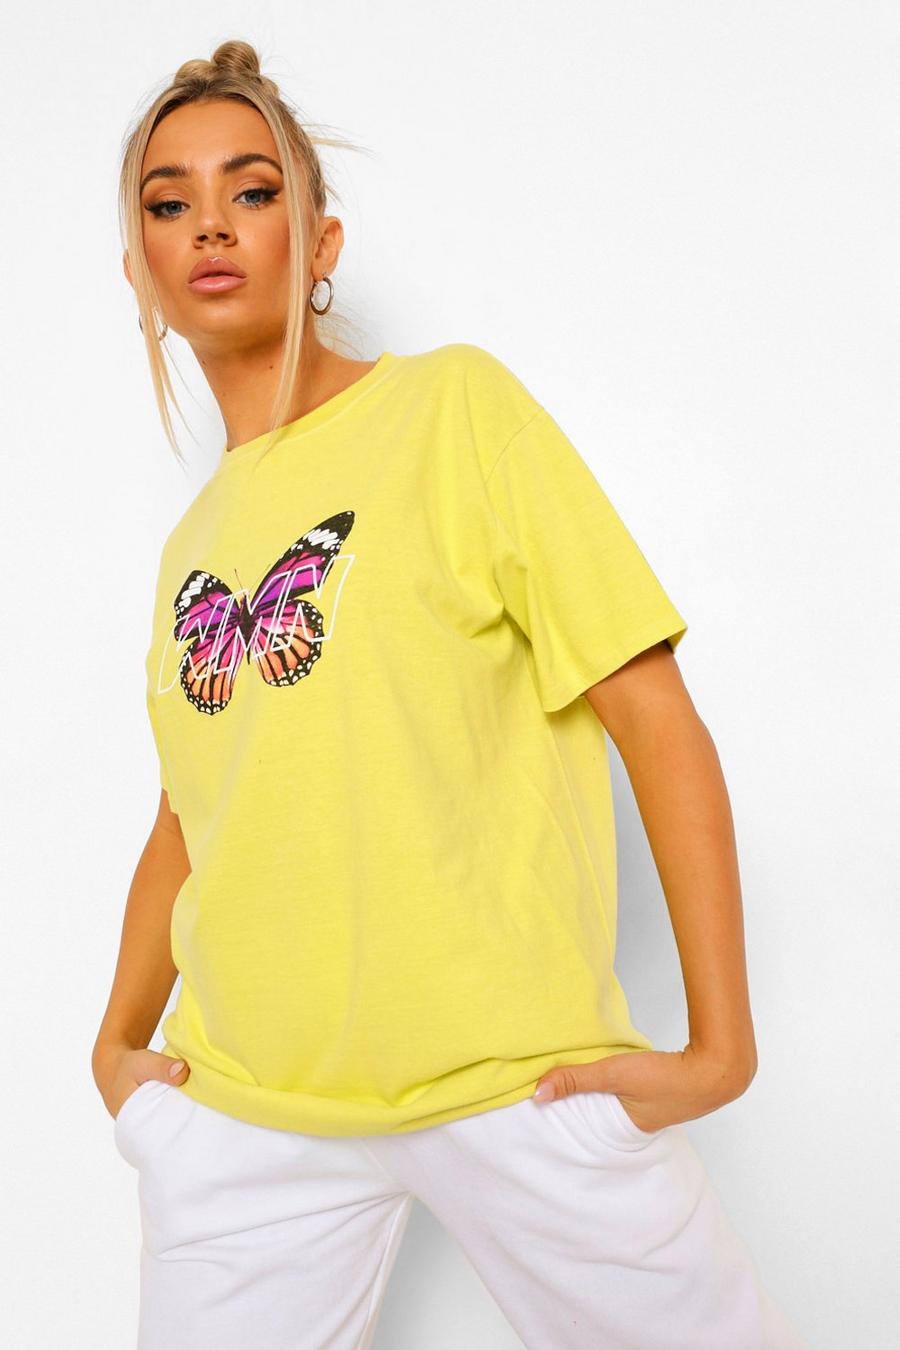 T-shirt Woman con stampa farfalle, Lime gerde image number 1